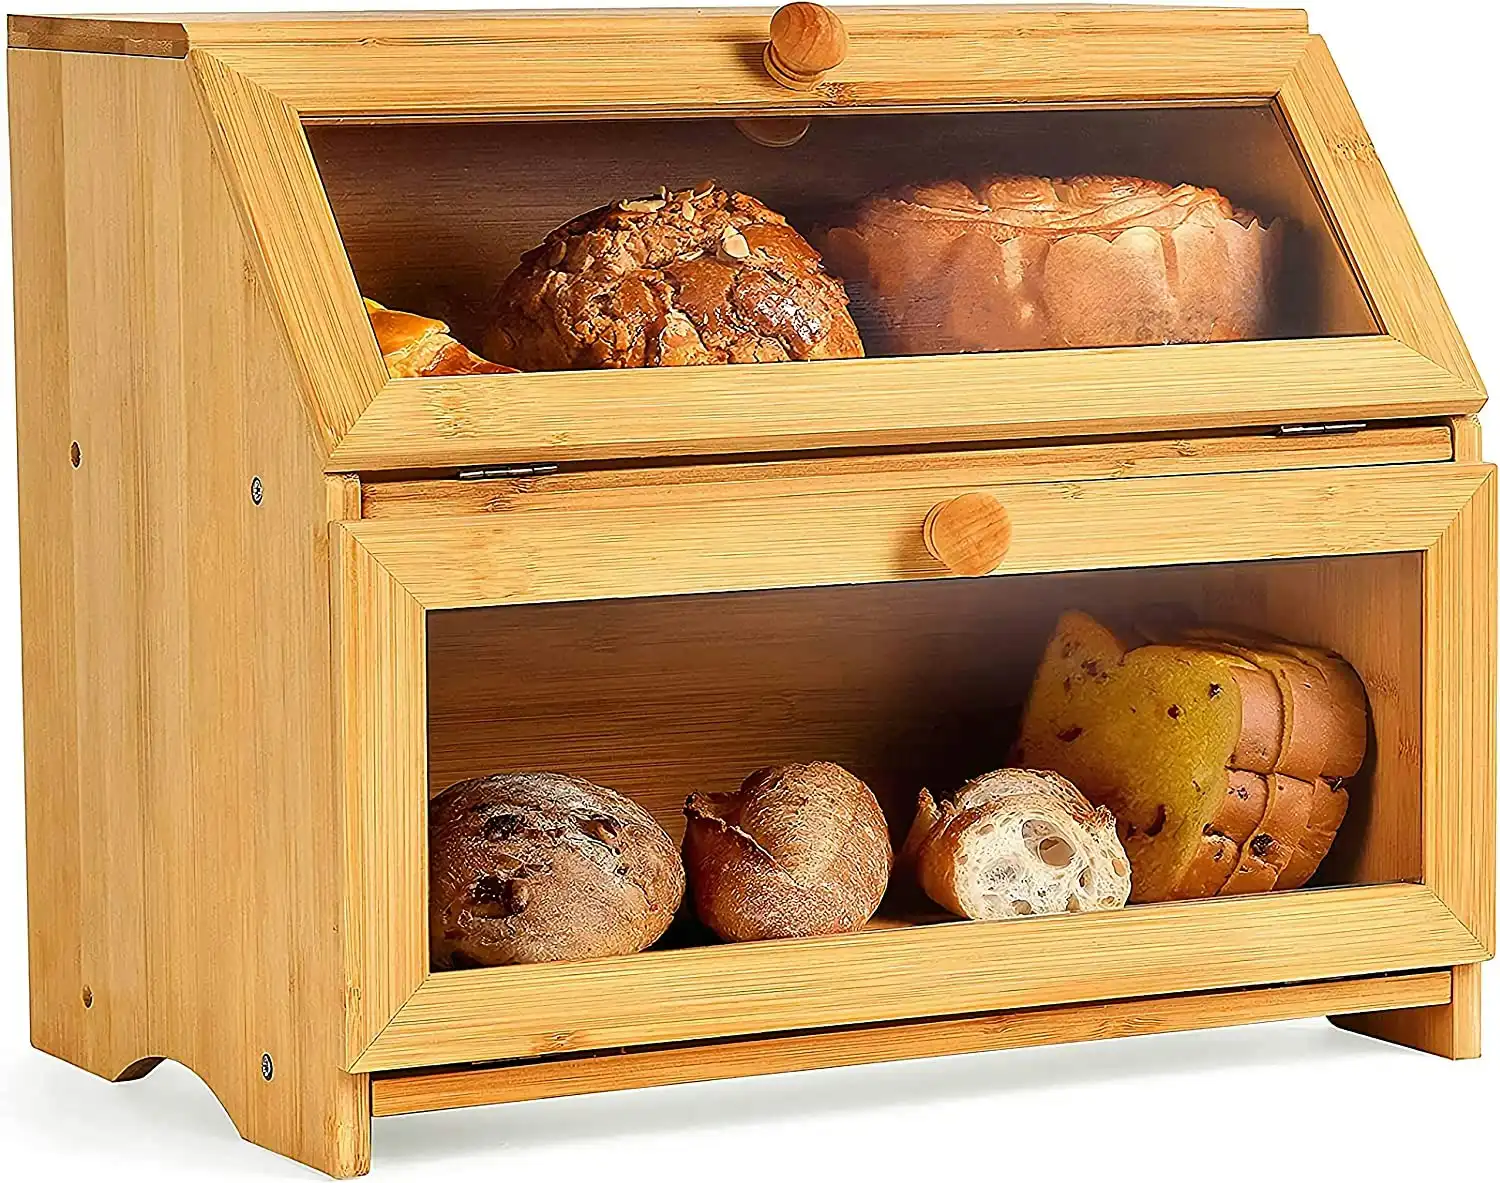 Double Layer Large Bread Box Kitchen Countertop Wooden Capacity Bamboo Farmhouse Style Clear Window Self-Assembly